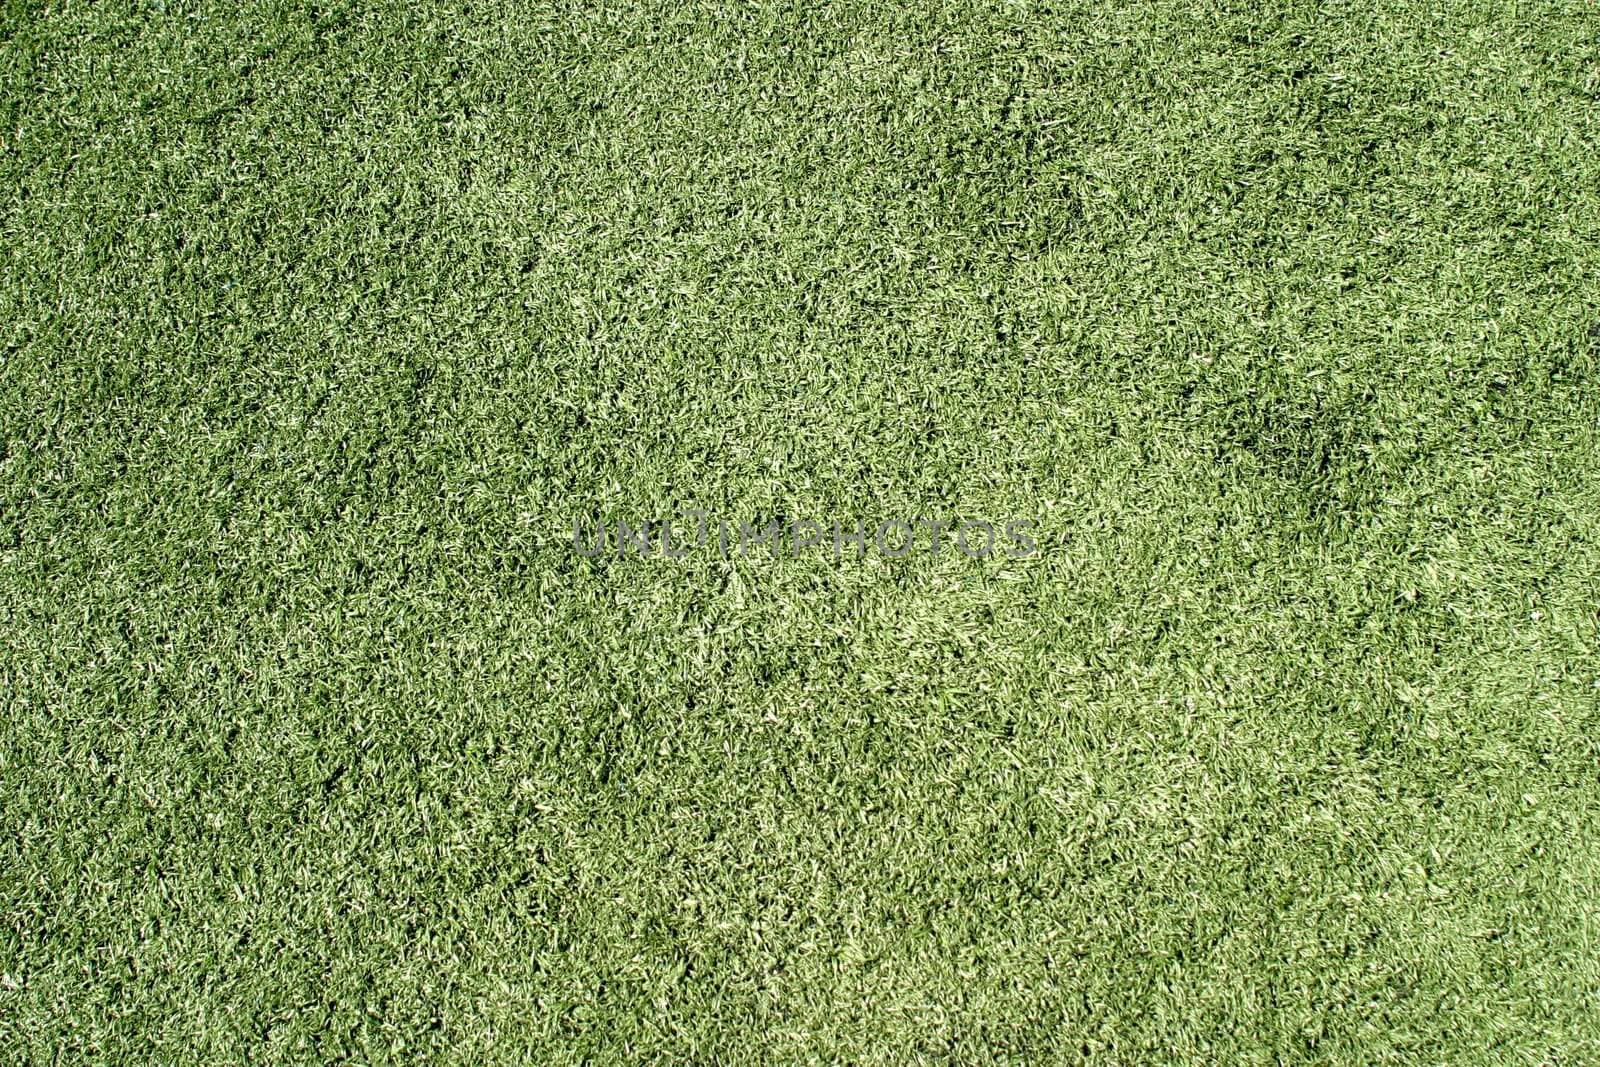 Green lawn on a sports field for football